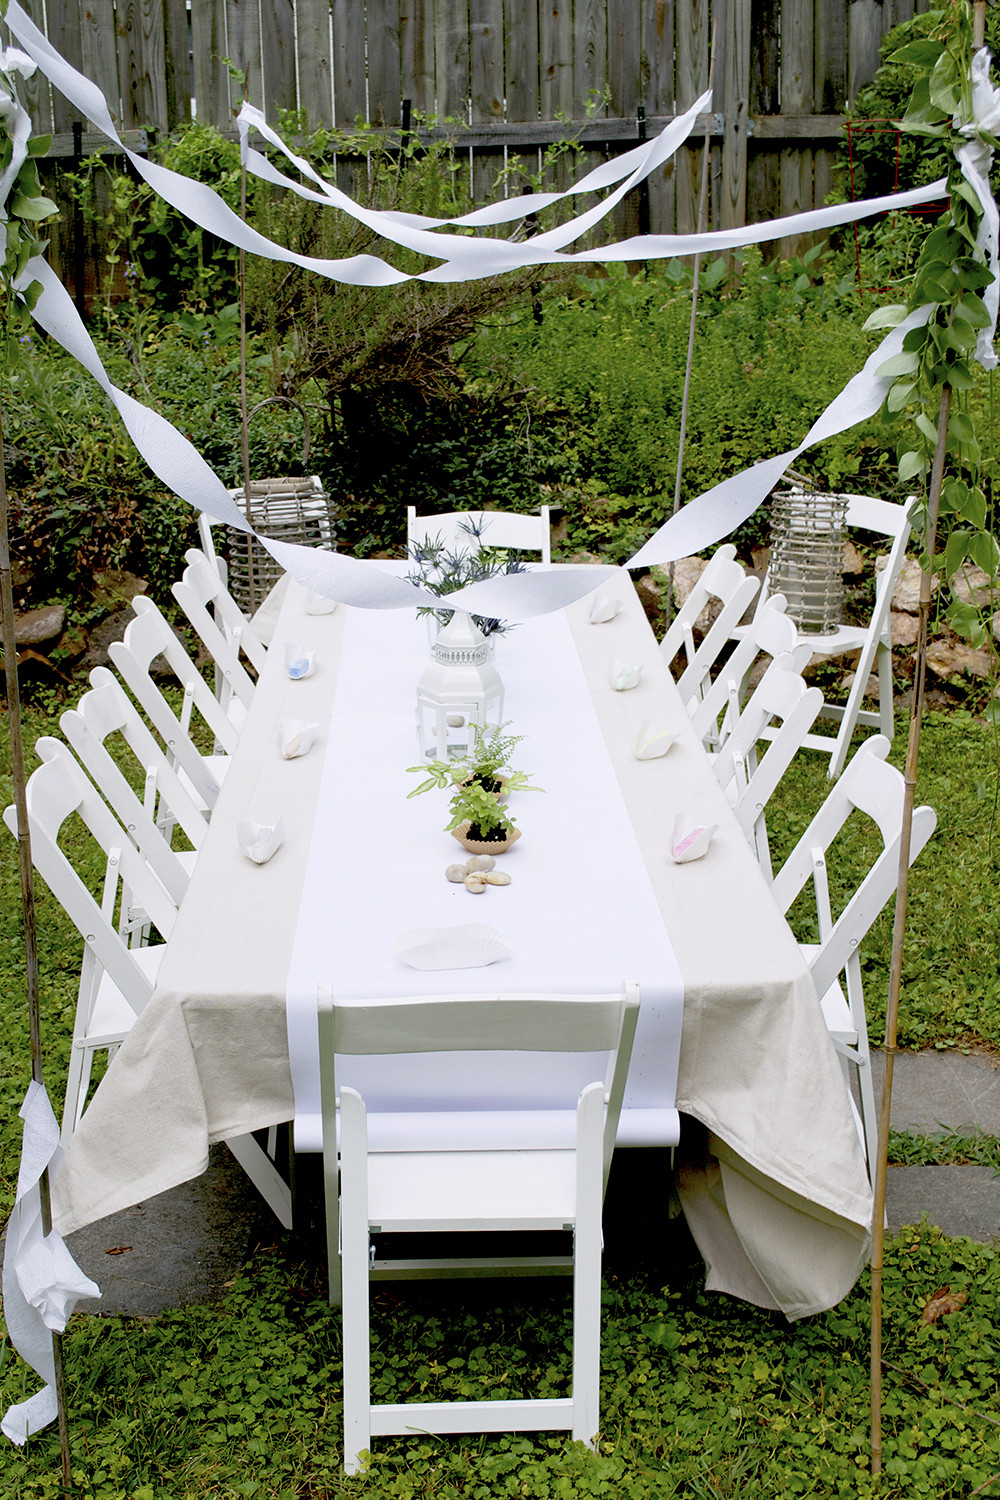 Kids Party Table And Chairs
 The Kids Table Grows Up How to Decorate for Your Son or